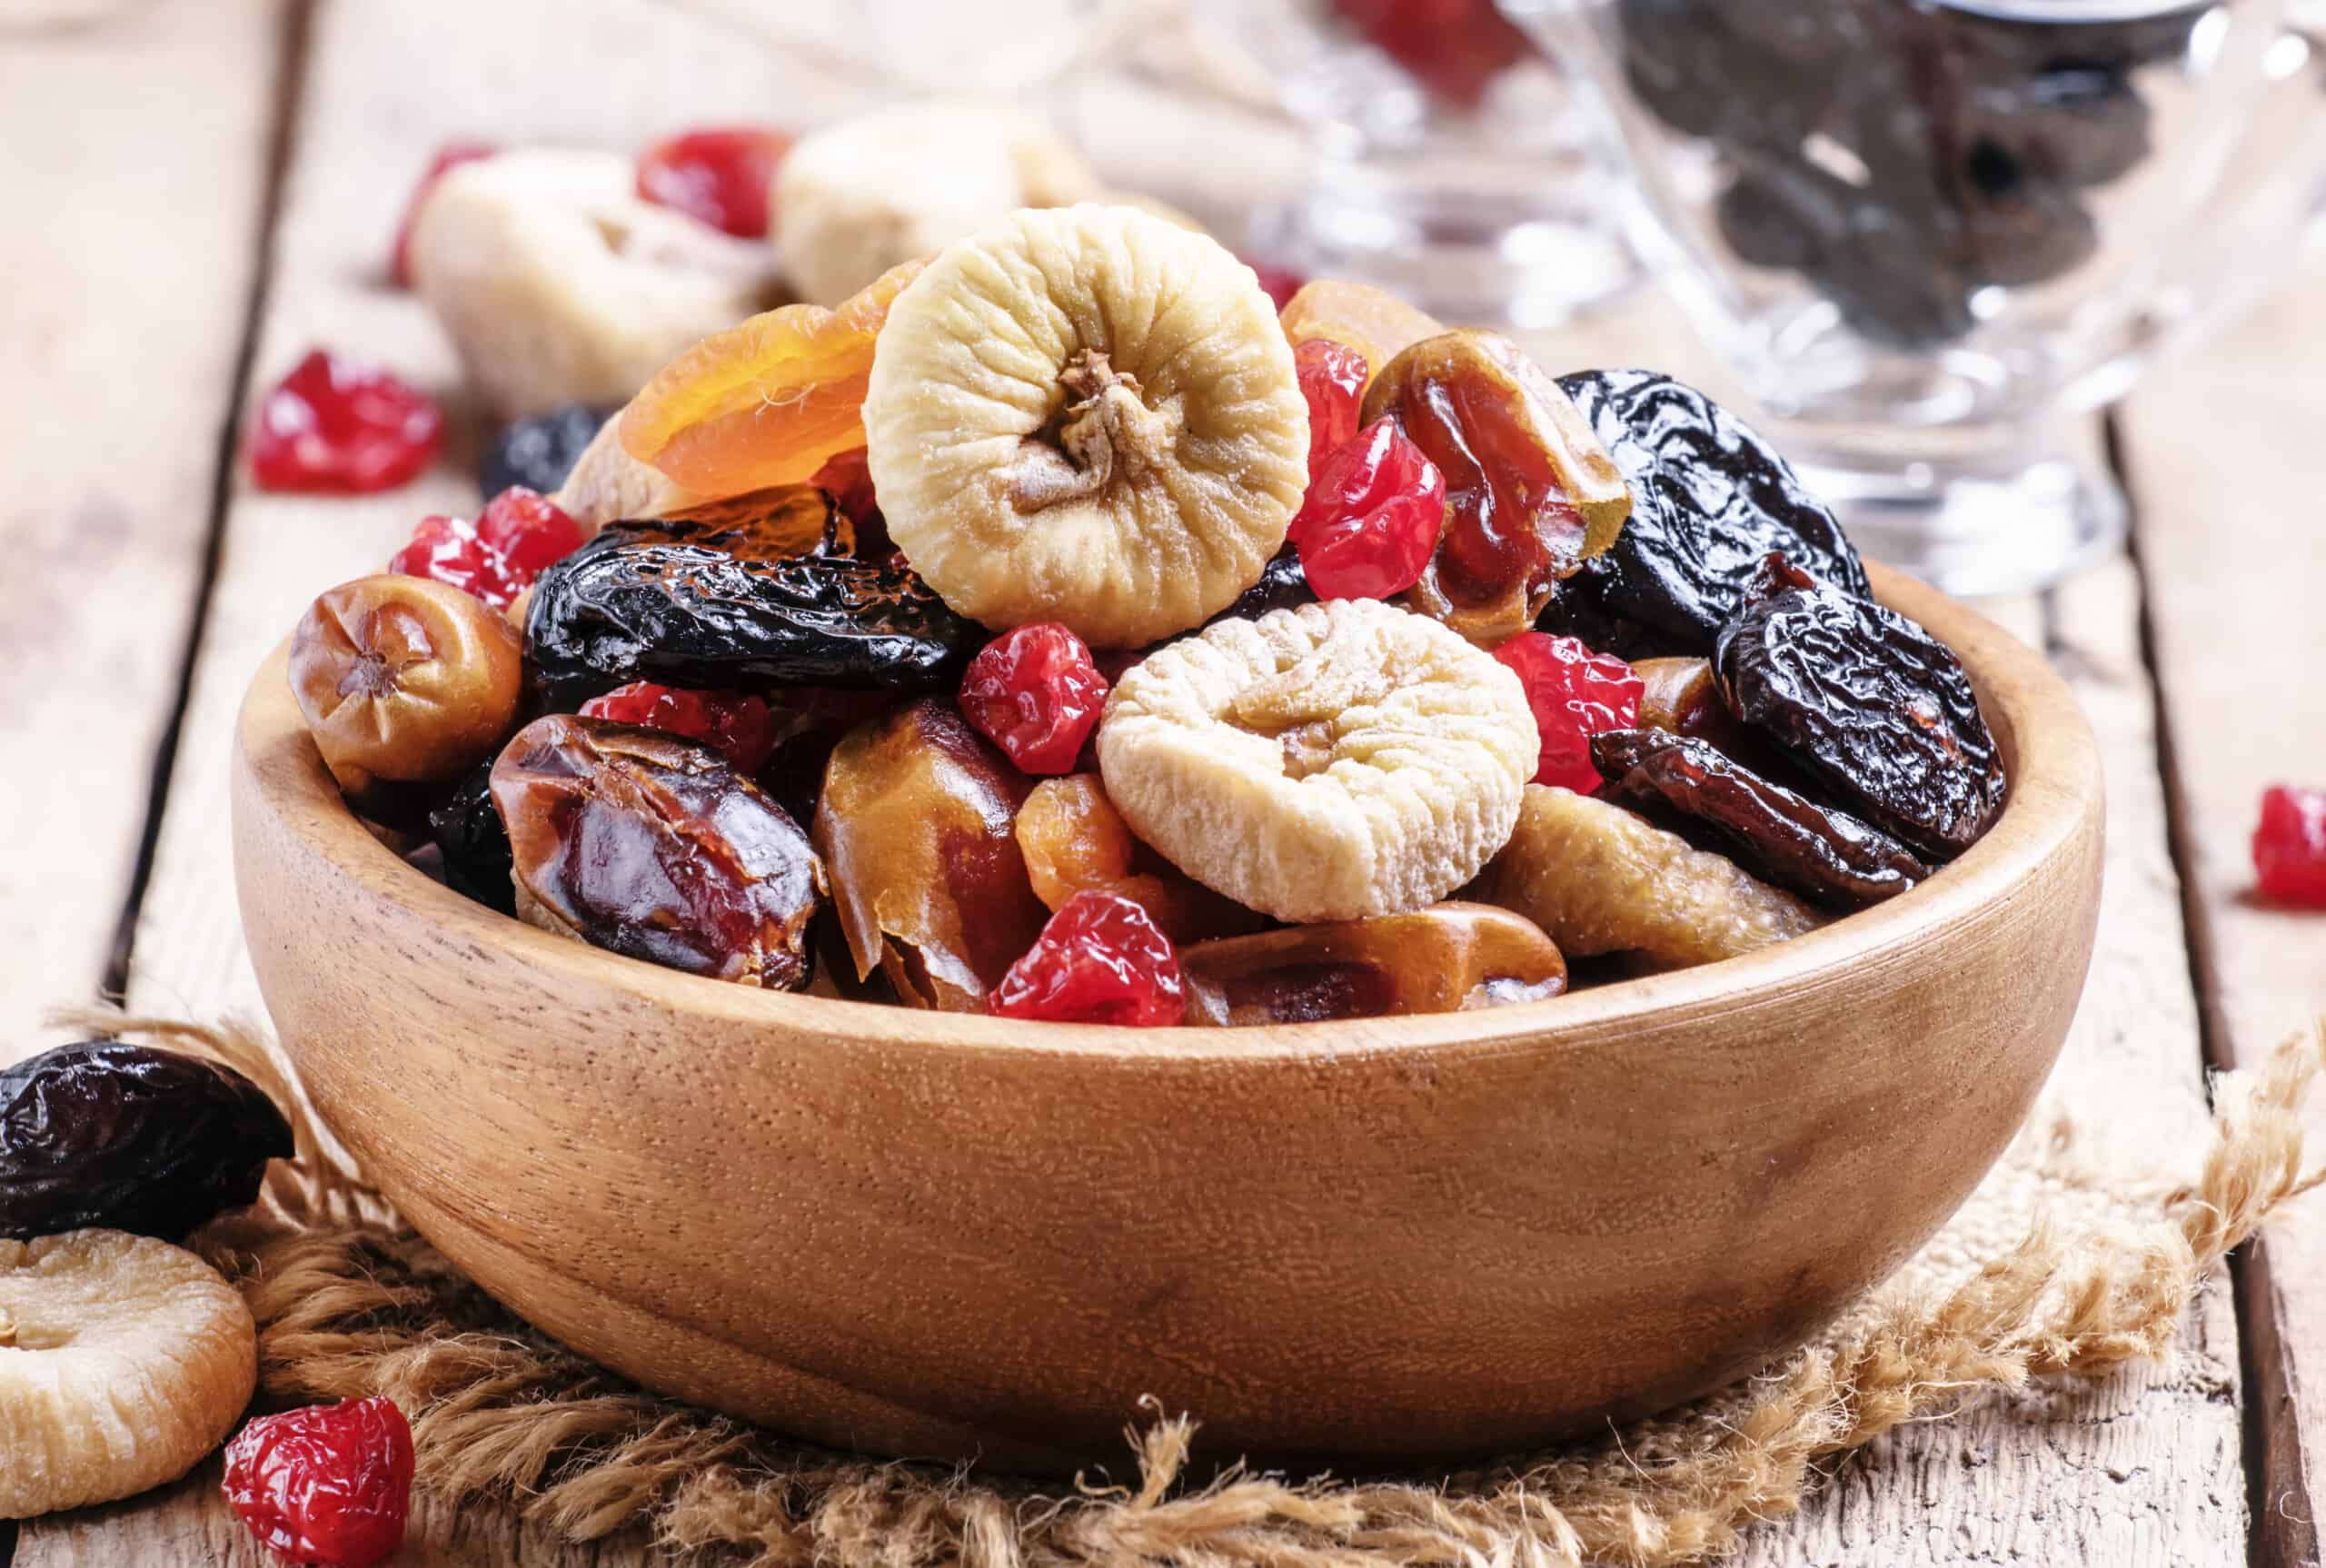 How to Use Dried Fruit in Smoothies